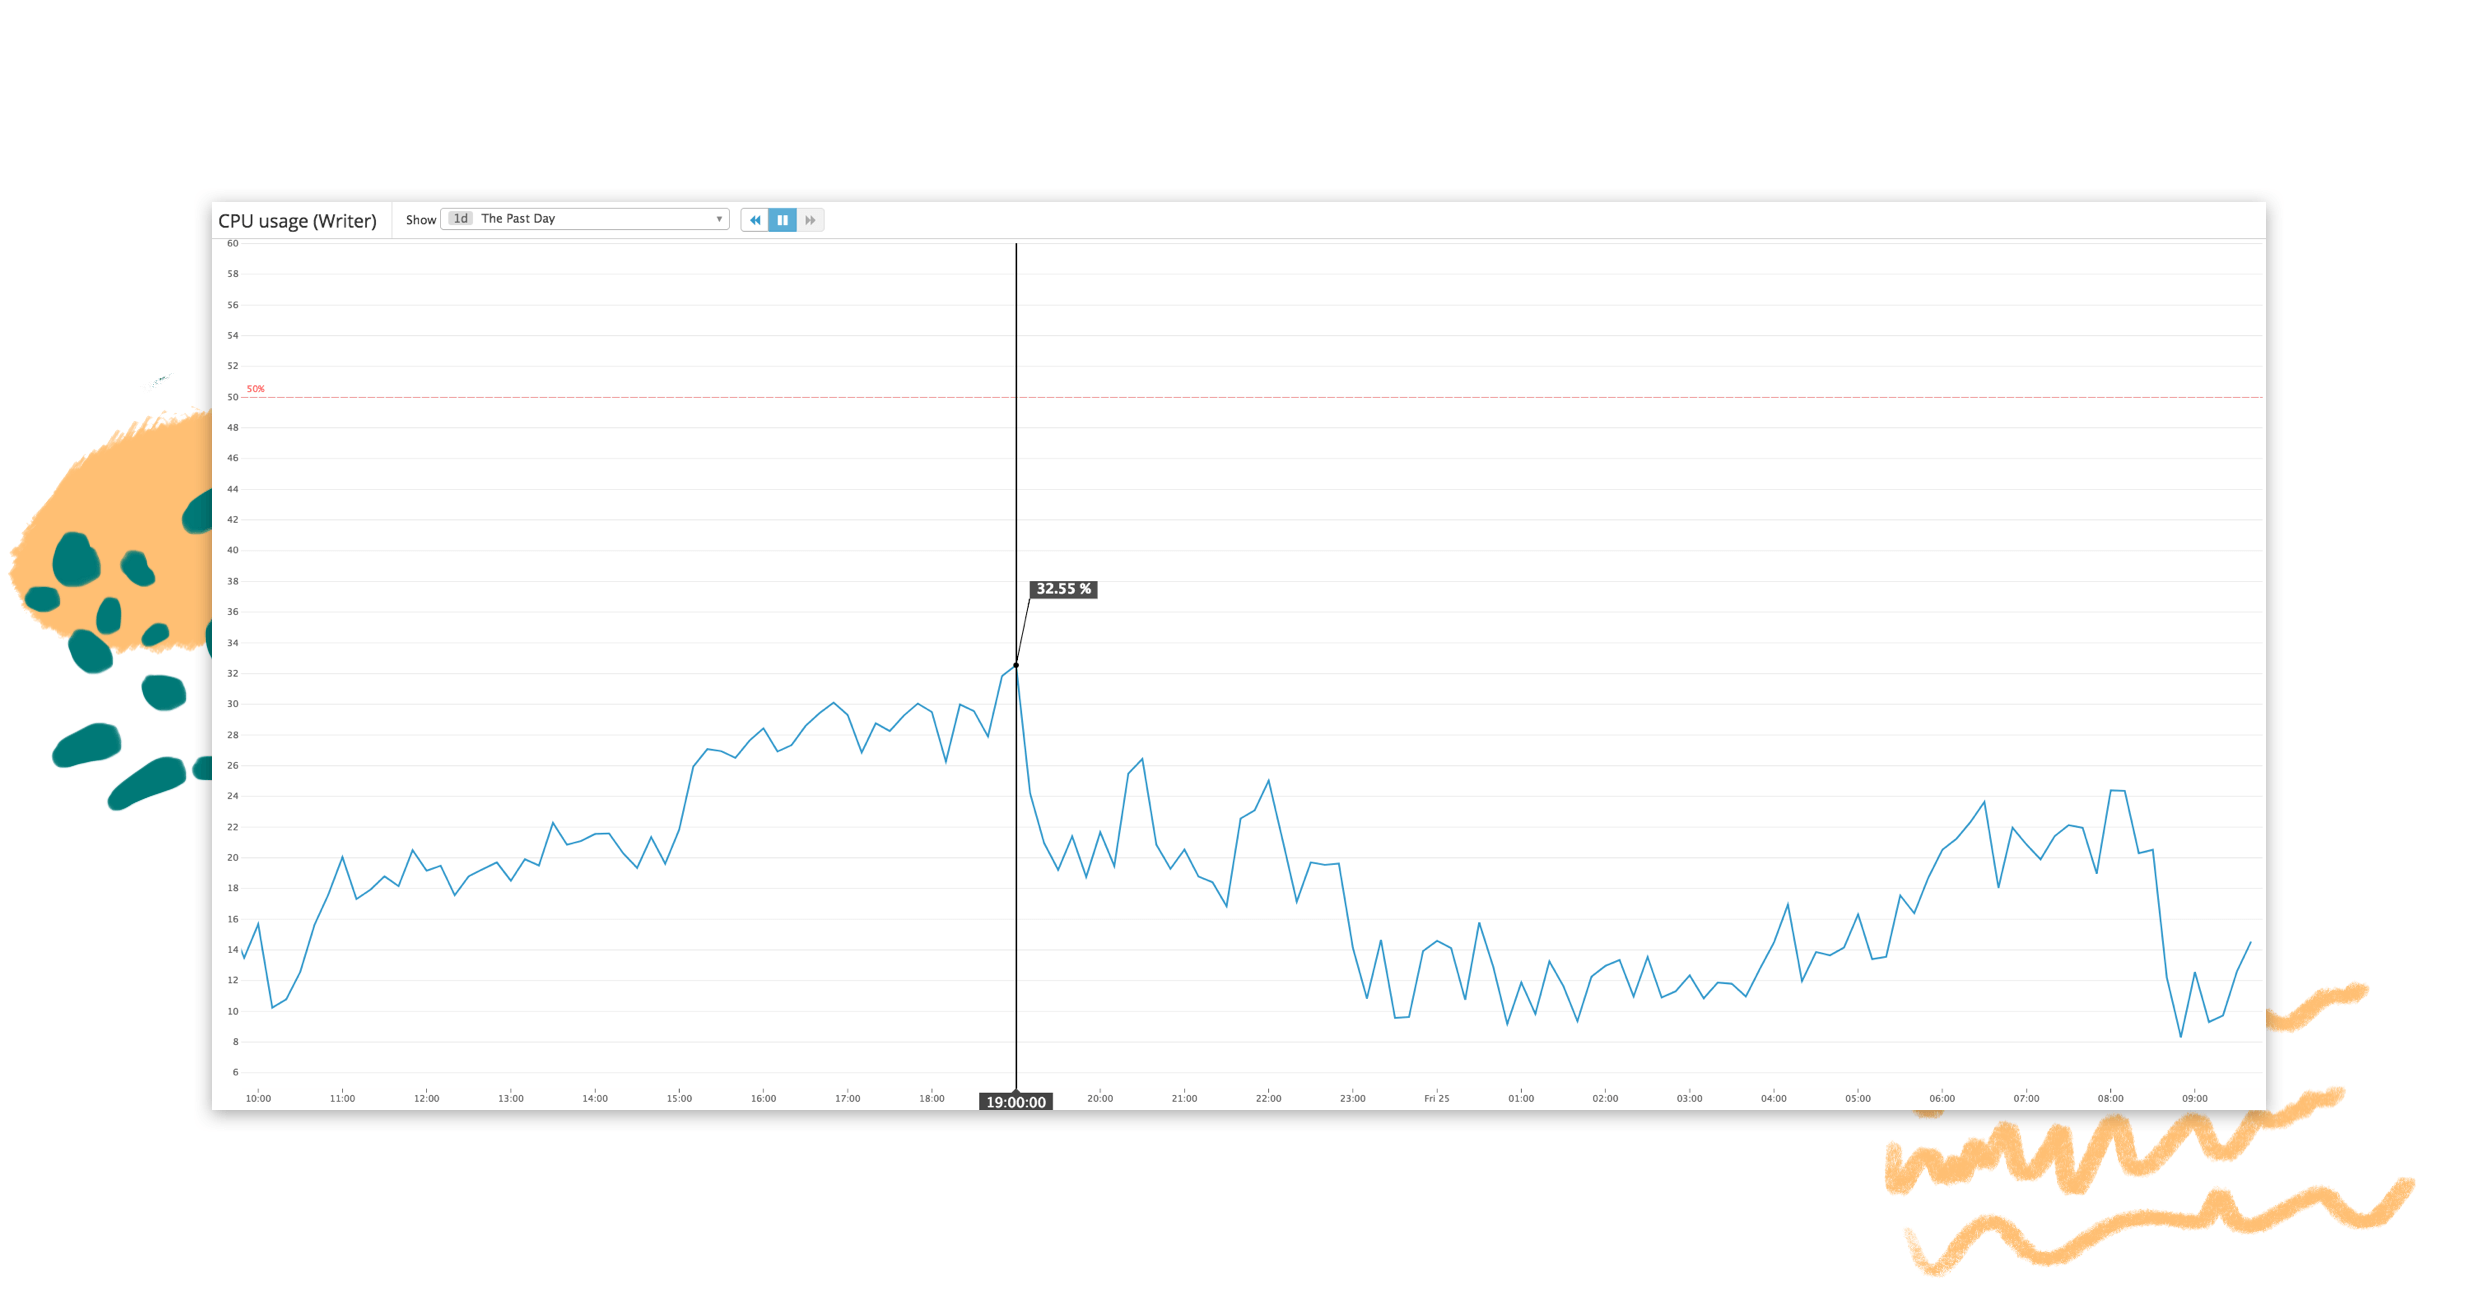 Relatively consistent CPU usage primary database during GDPR surge